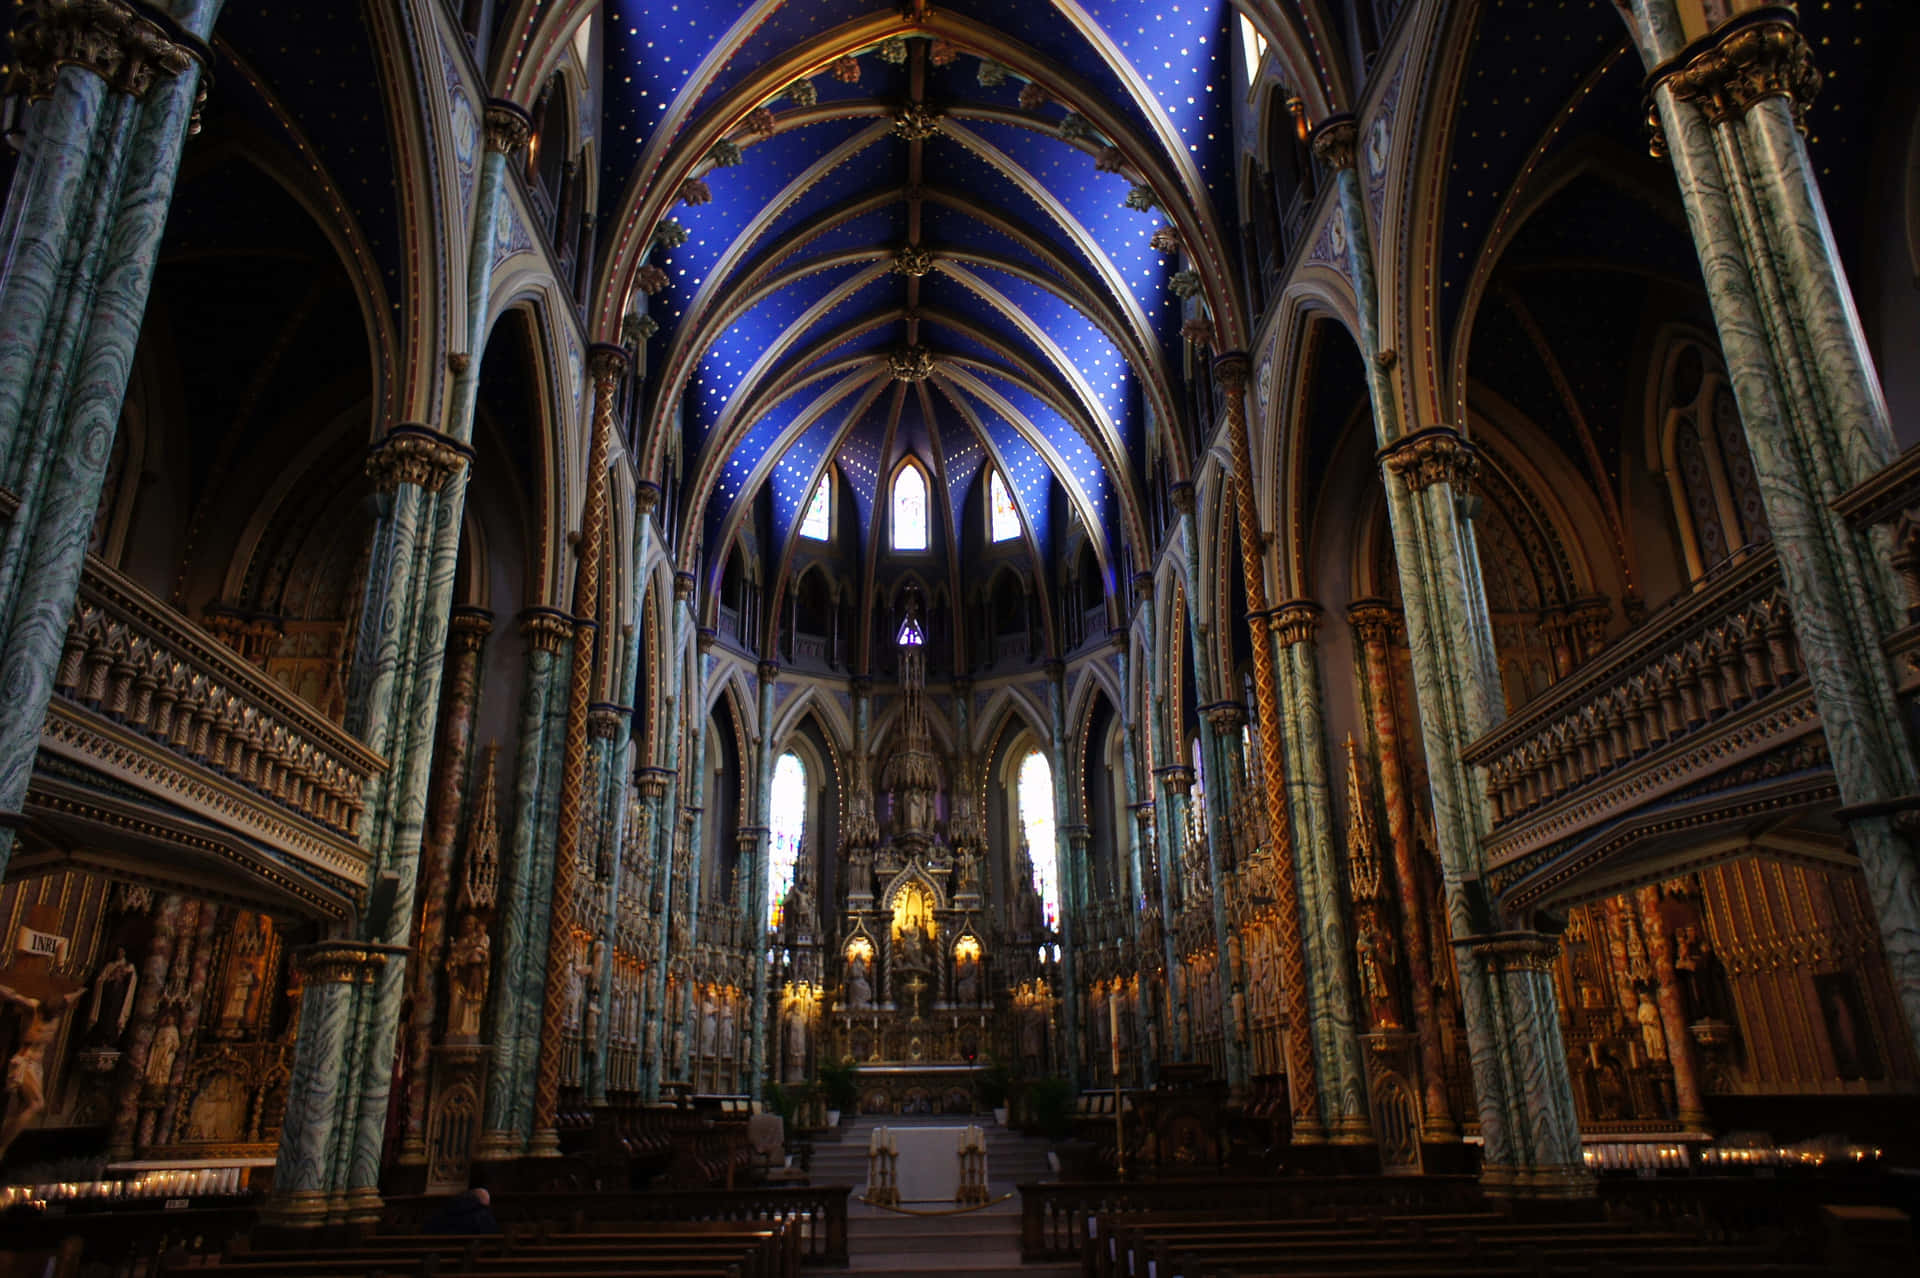 Explore the beauty of nature and divinity at this breathtaking church